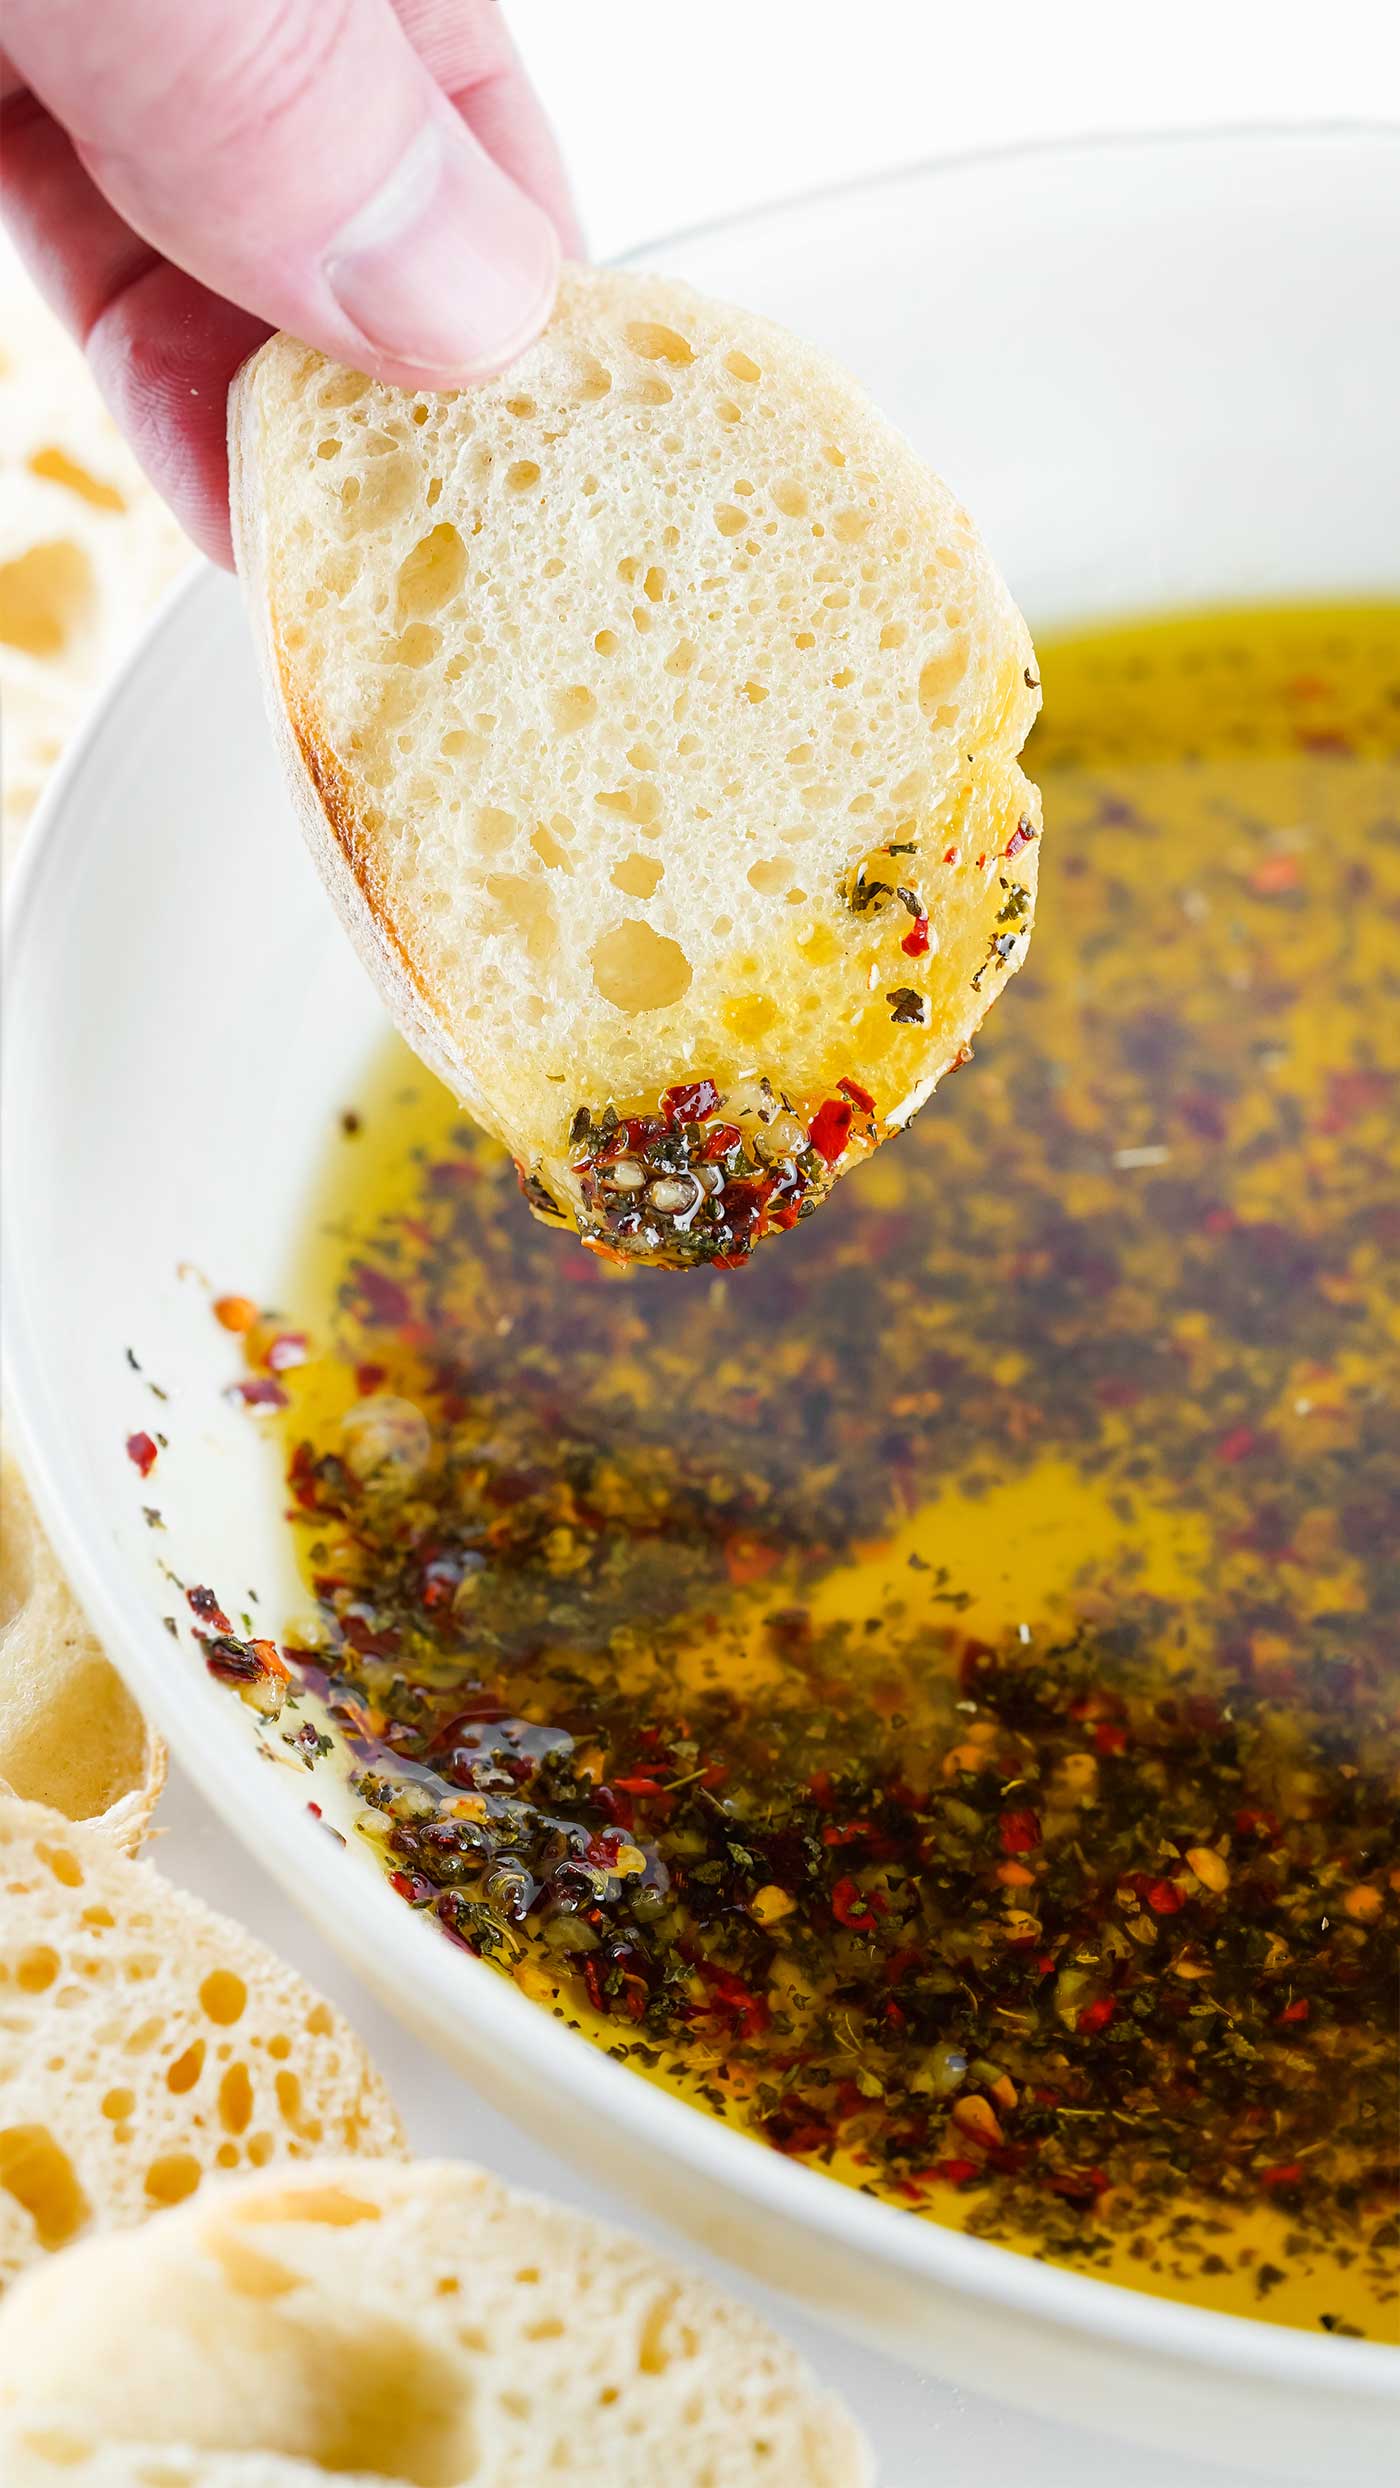 Slice of Bread in with seasoning and oil